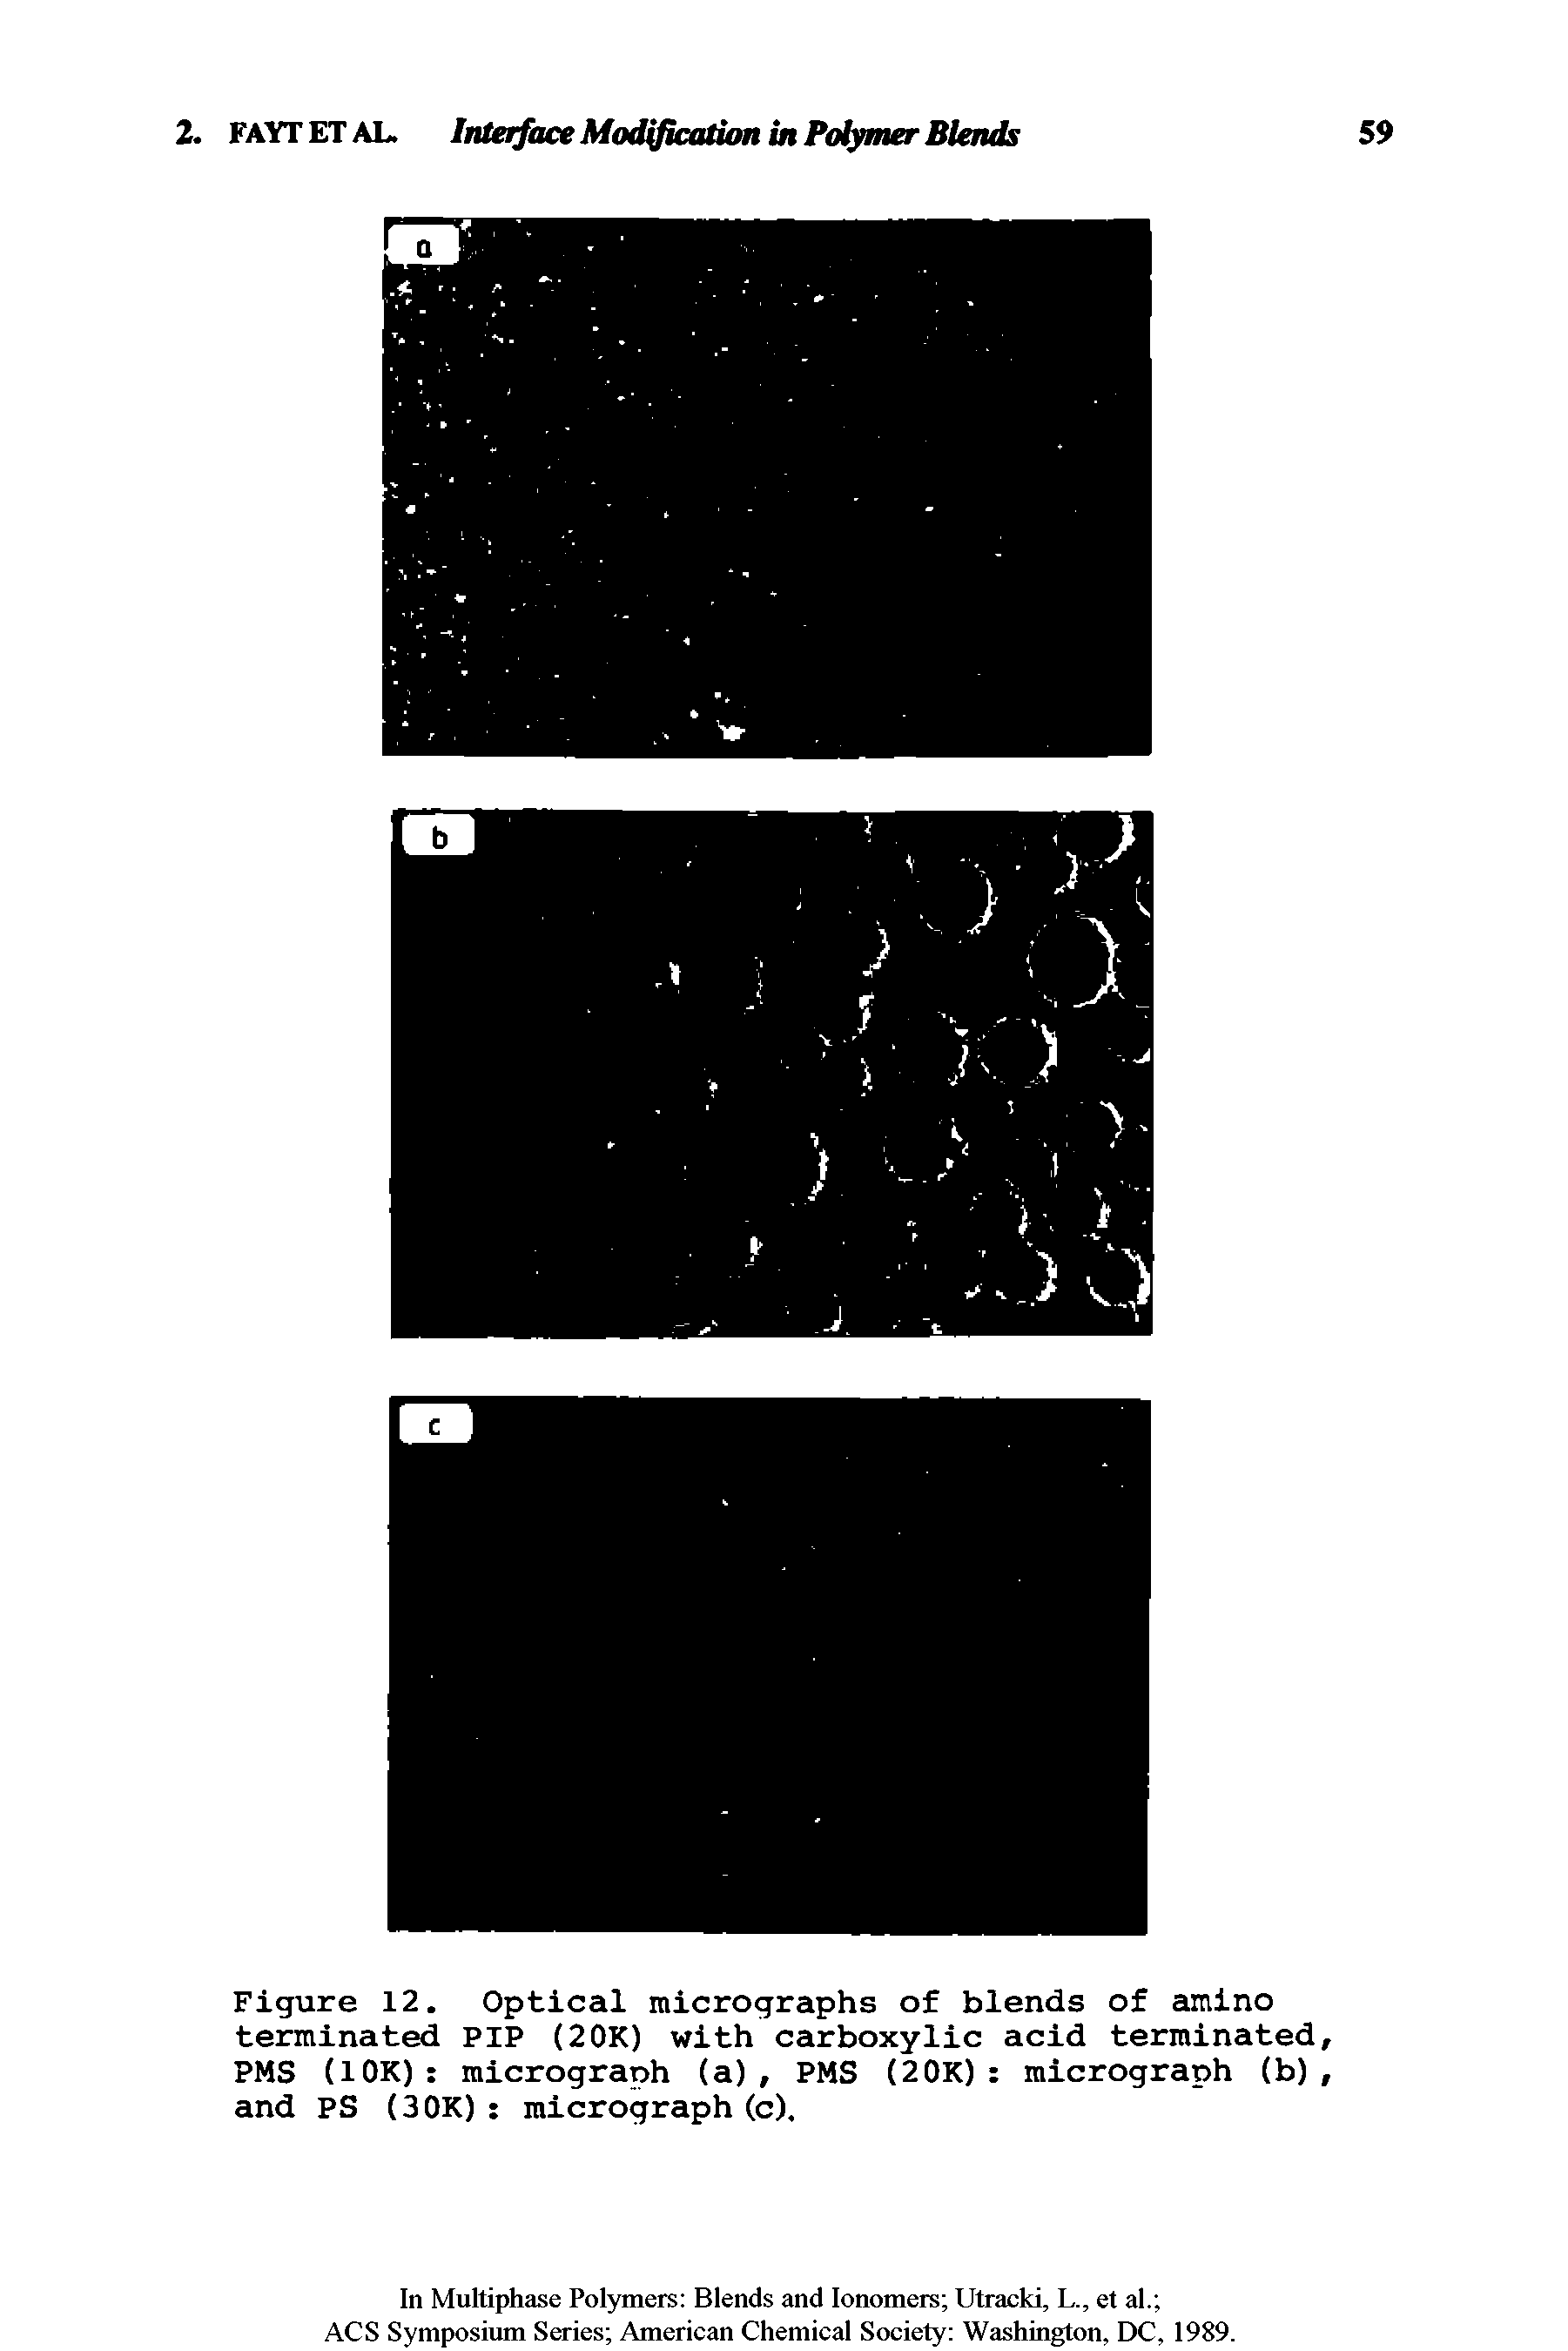 Figure 12. Optical micrographs of blends of amino terminated PIP (2OK) with carboxylic acid terminated, PMS (lOK) micrograph (a), PMS (20K) micrograph (b), and PS (3 OK) micrograph (c).